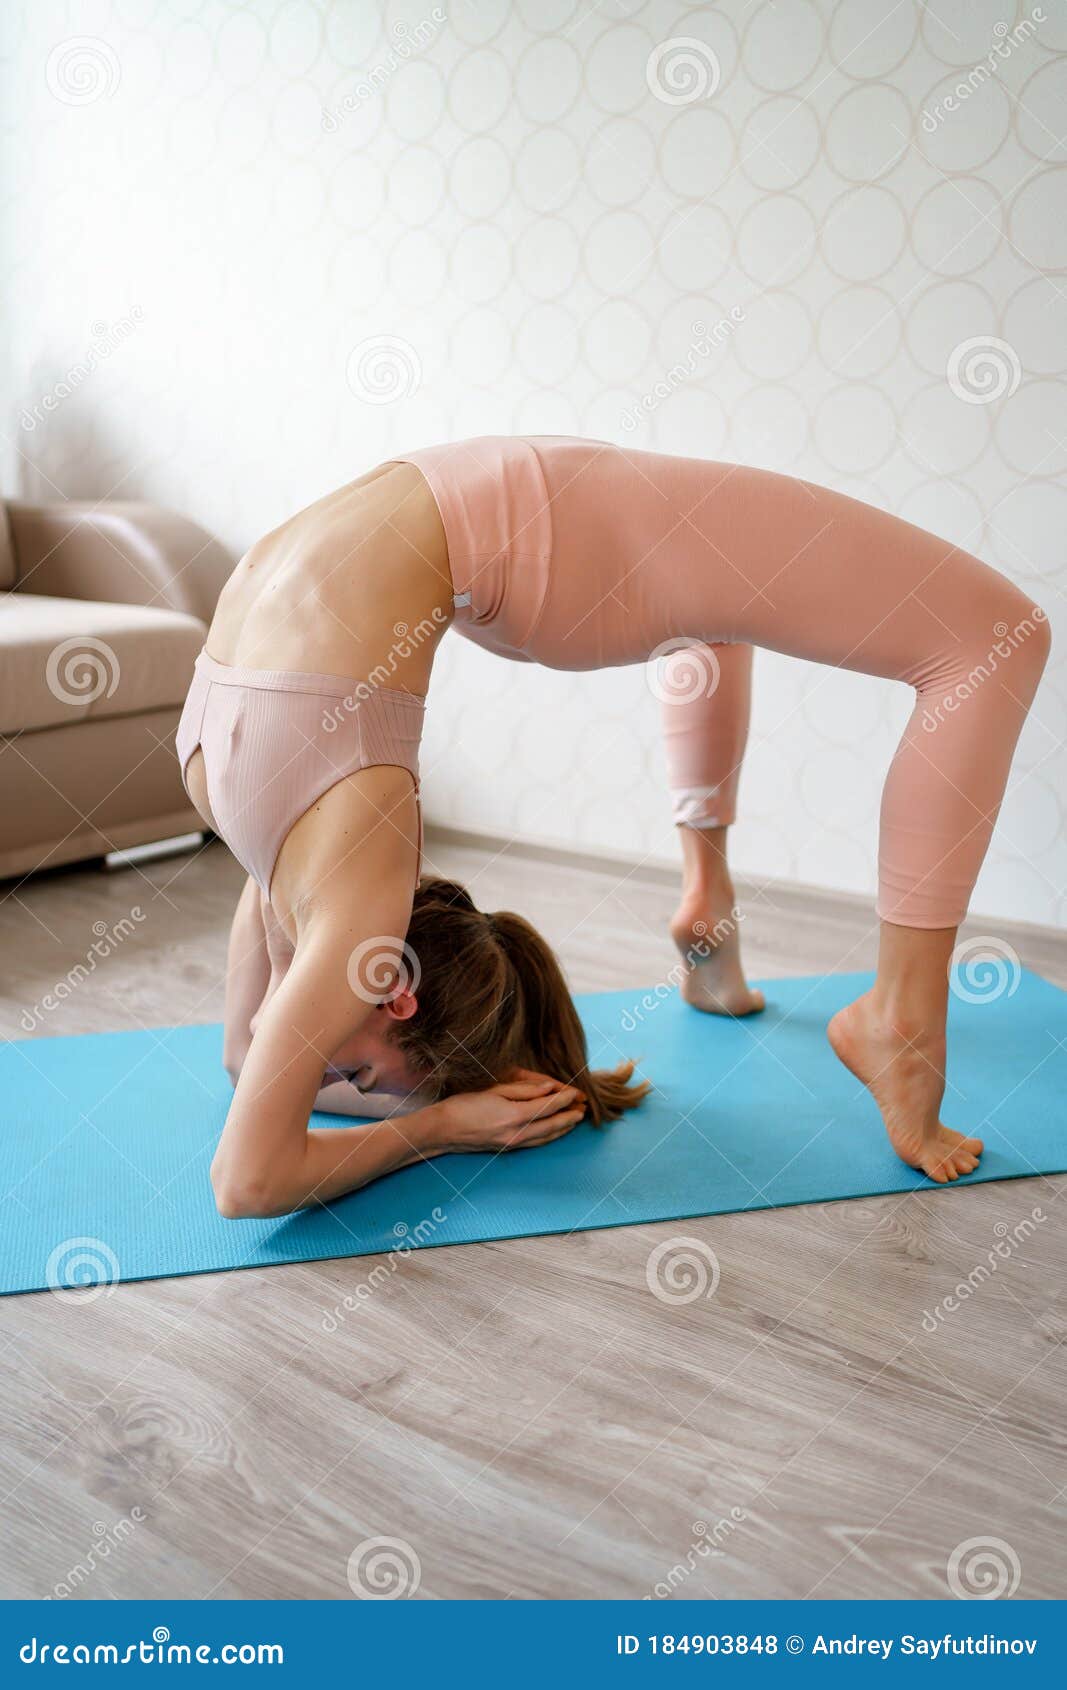 https://thumbs.dreamstime.com/z/girl-beautiful-athletic-body-does-yoga-exercises-home-pilates-fitness-girl-beautiful-athletic-body-does-yoga-184903848.jpg